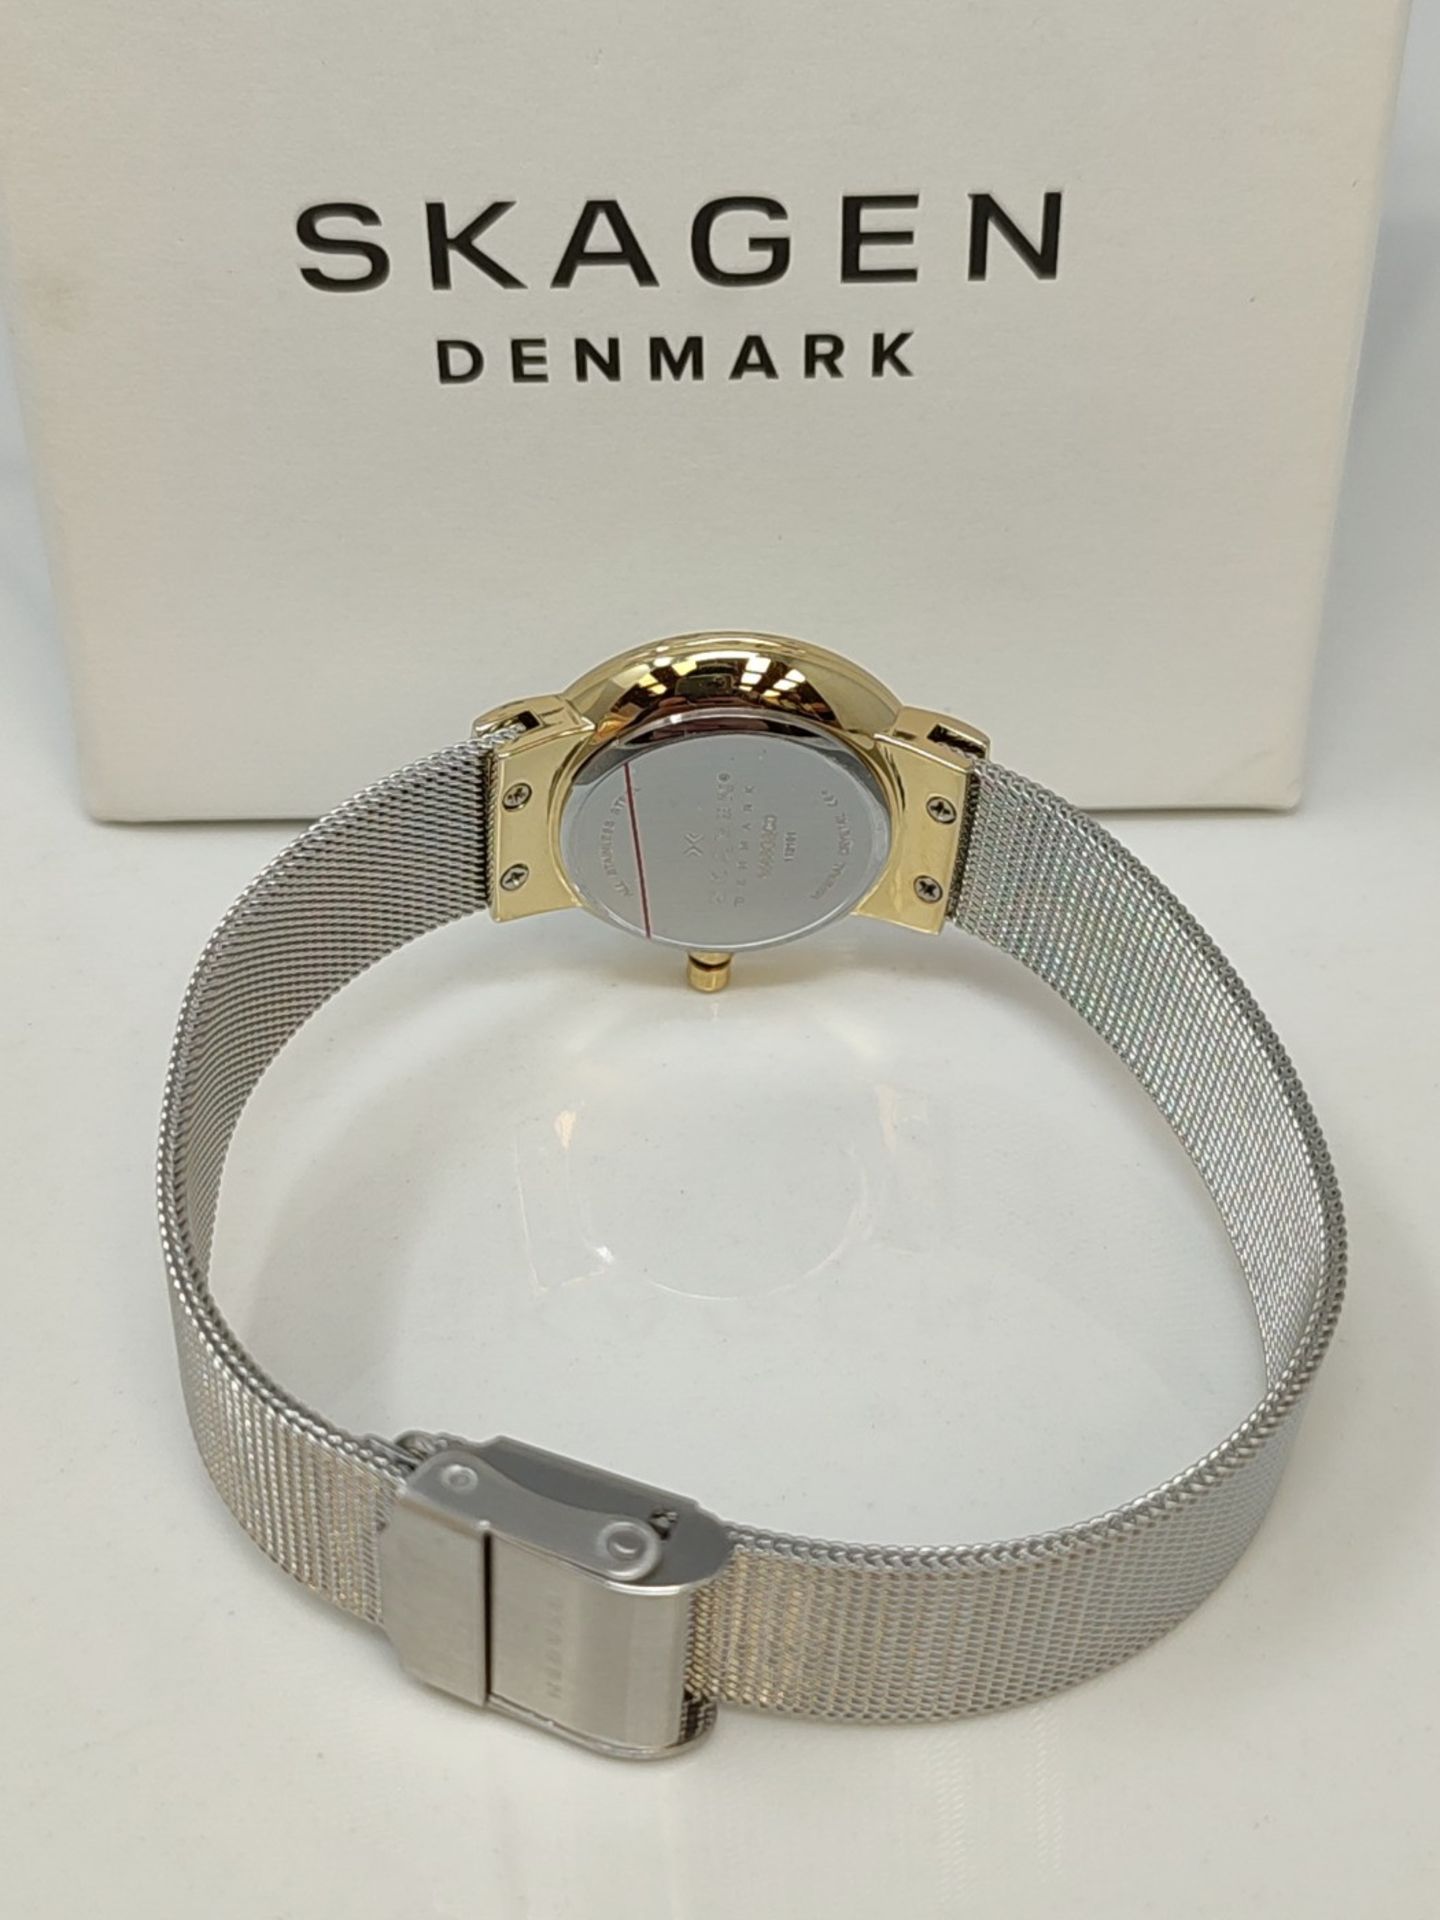 RRP £53.00 Skagen women's watch Freja Lille, two-hand movement, 26mm gold stainless steel case wi - Image 3 of 3